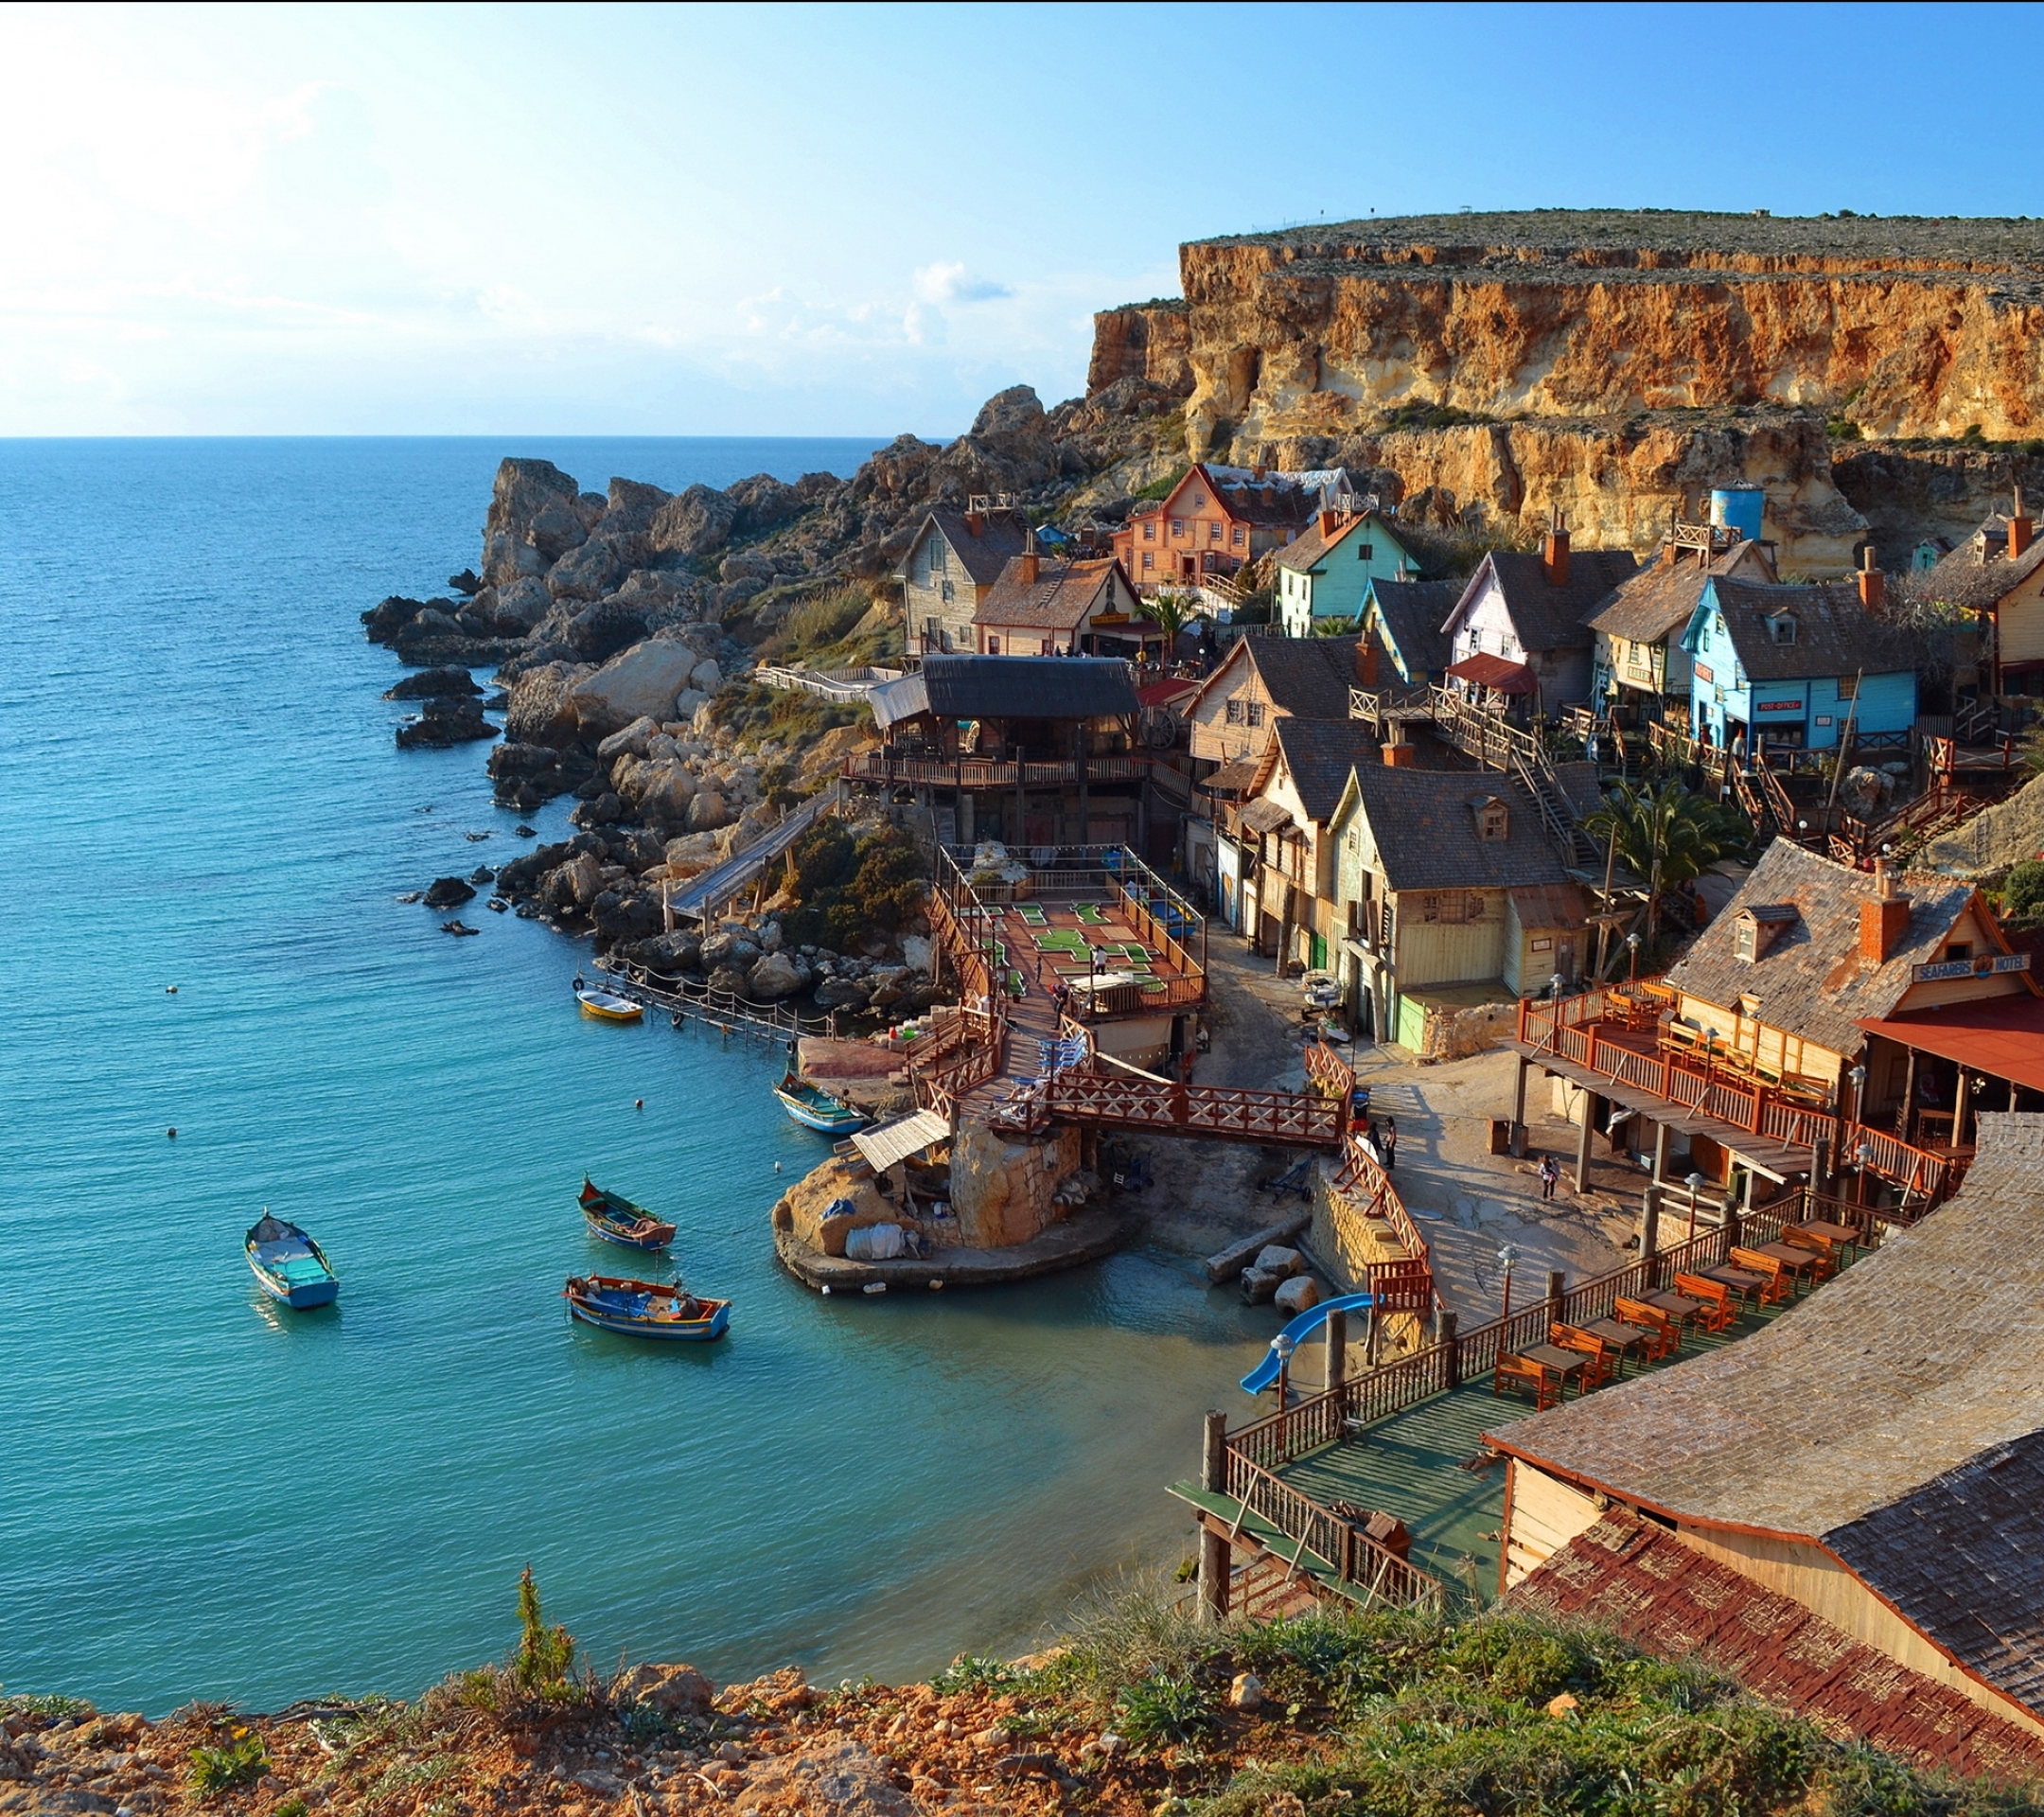 man made, popeye village, scenic, towns